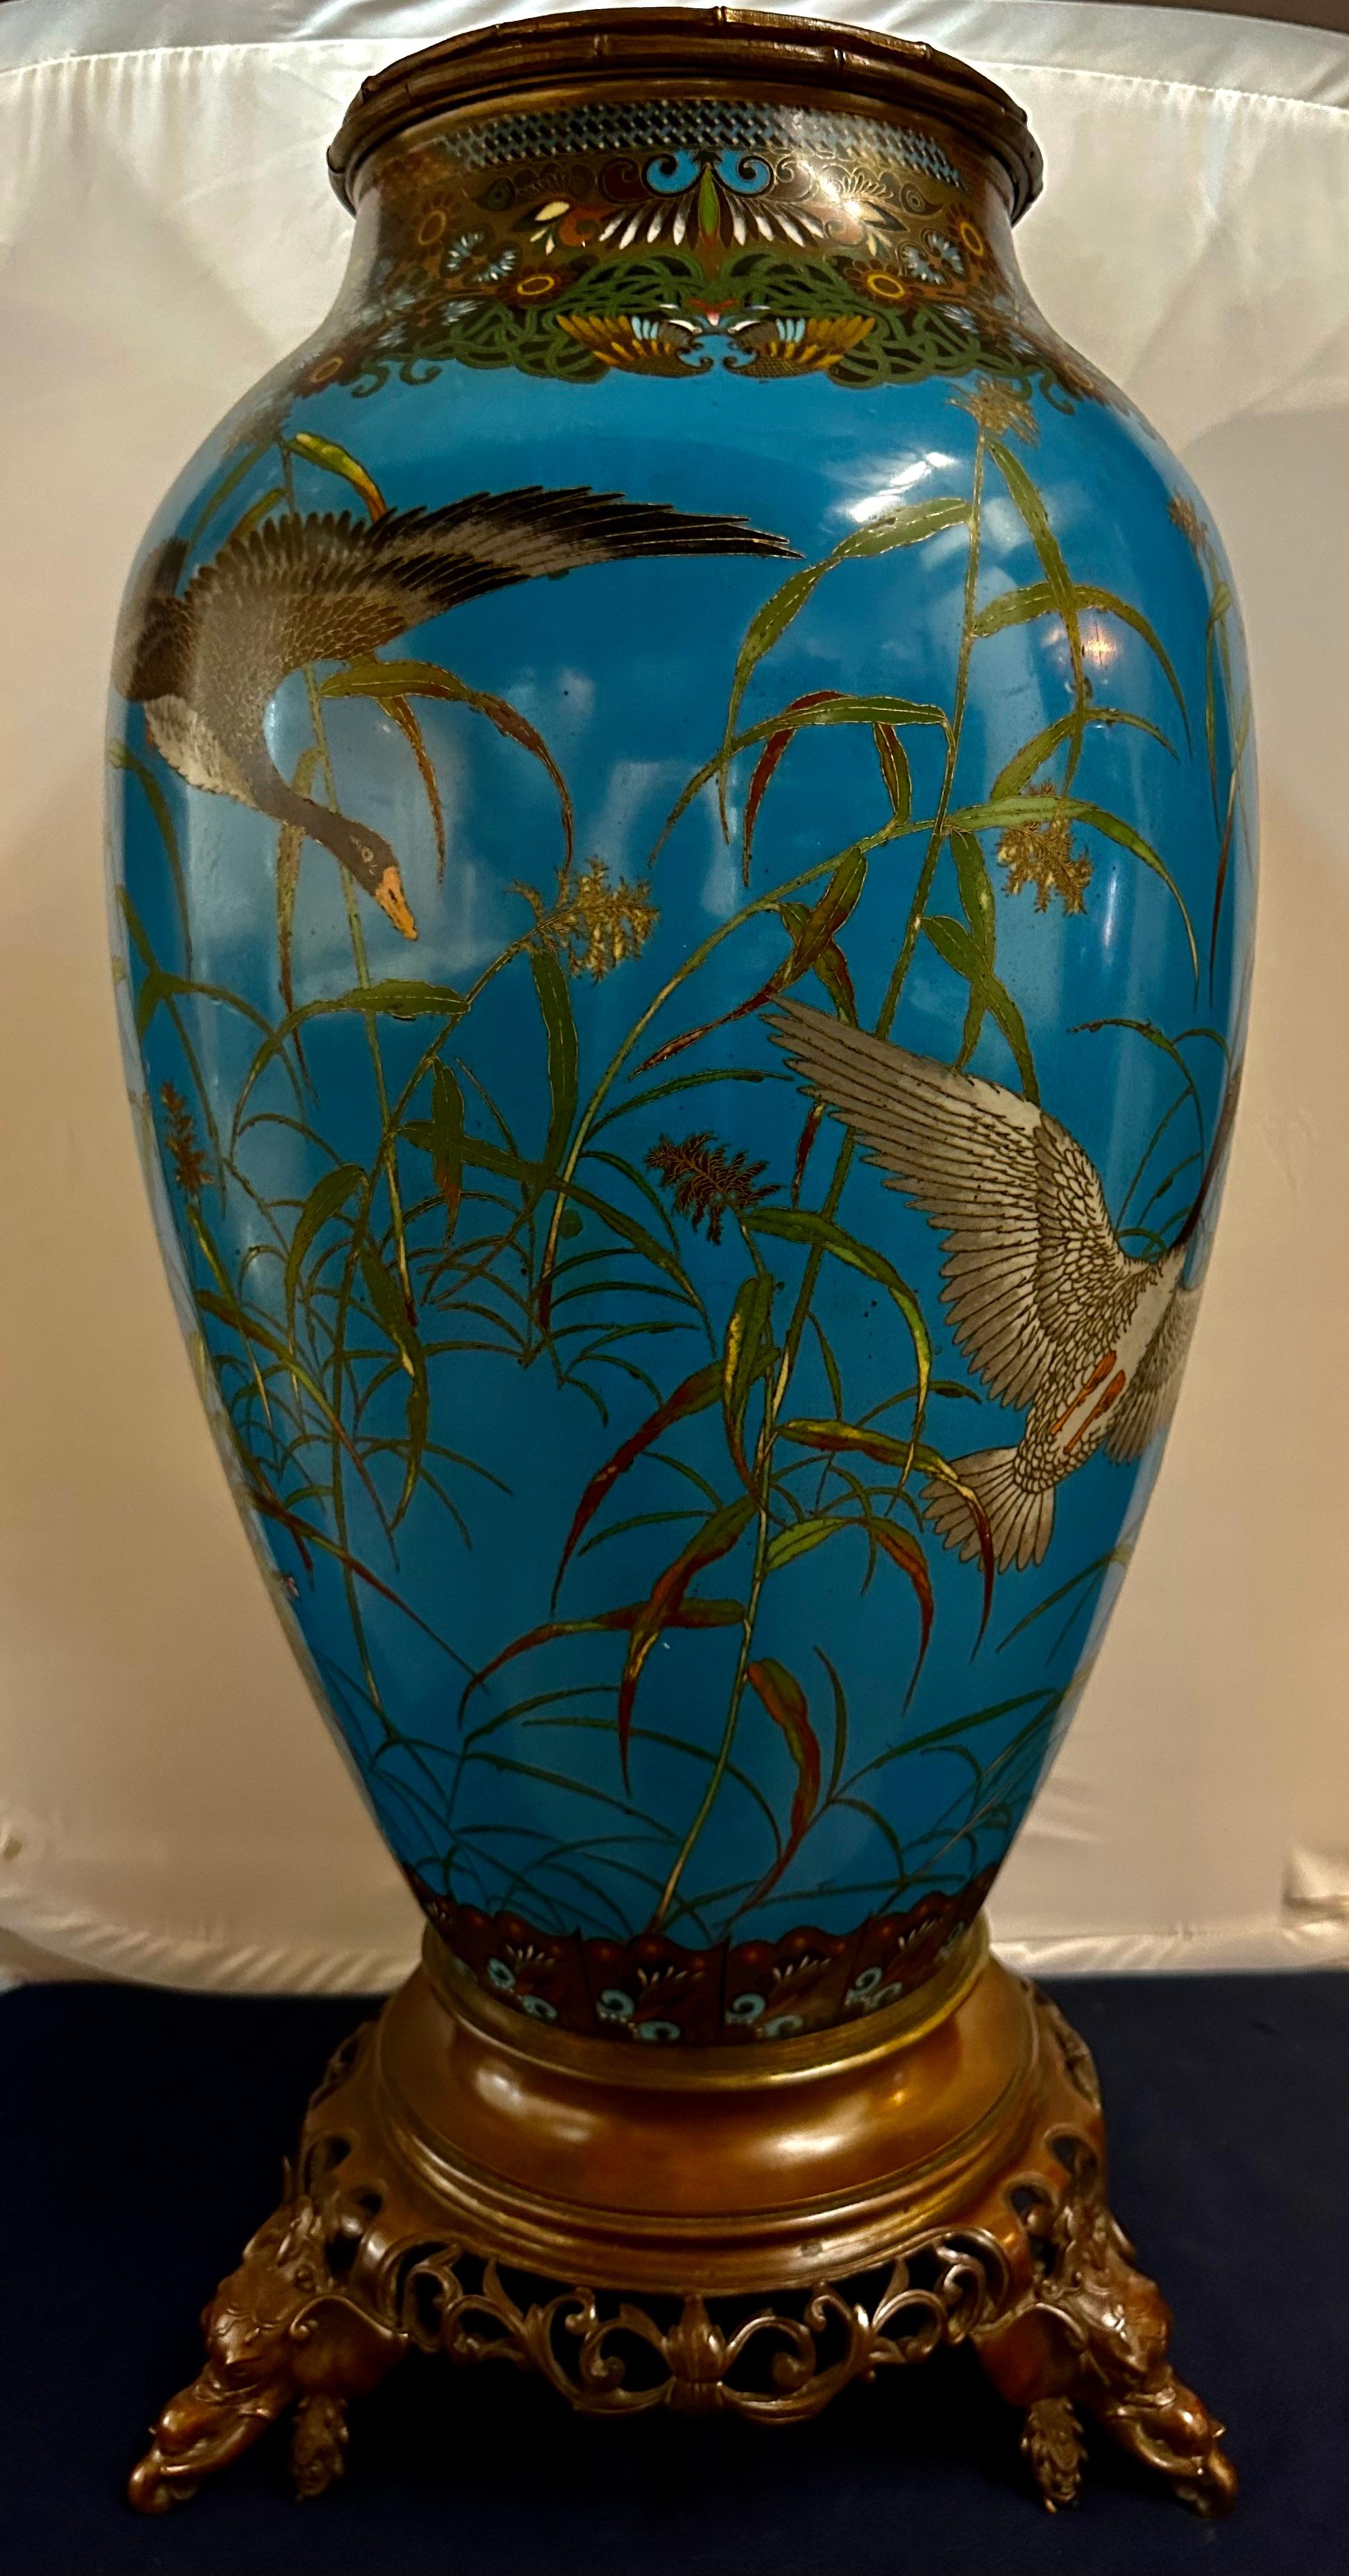 This magnificent vintage Japanese cloisonné floor vase dates from the late 19th century. It is hand enameled & artistically rendered with multiple wild geese in flight. The geese are seen rising from the Japanese pampas grass against a deep blue